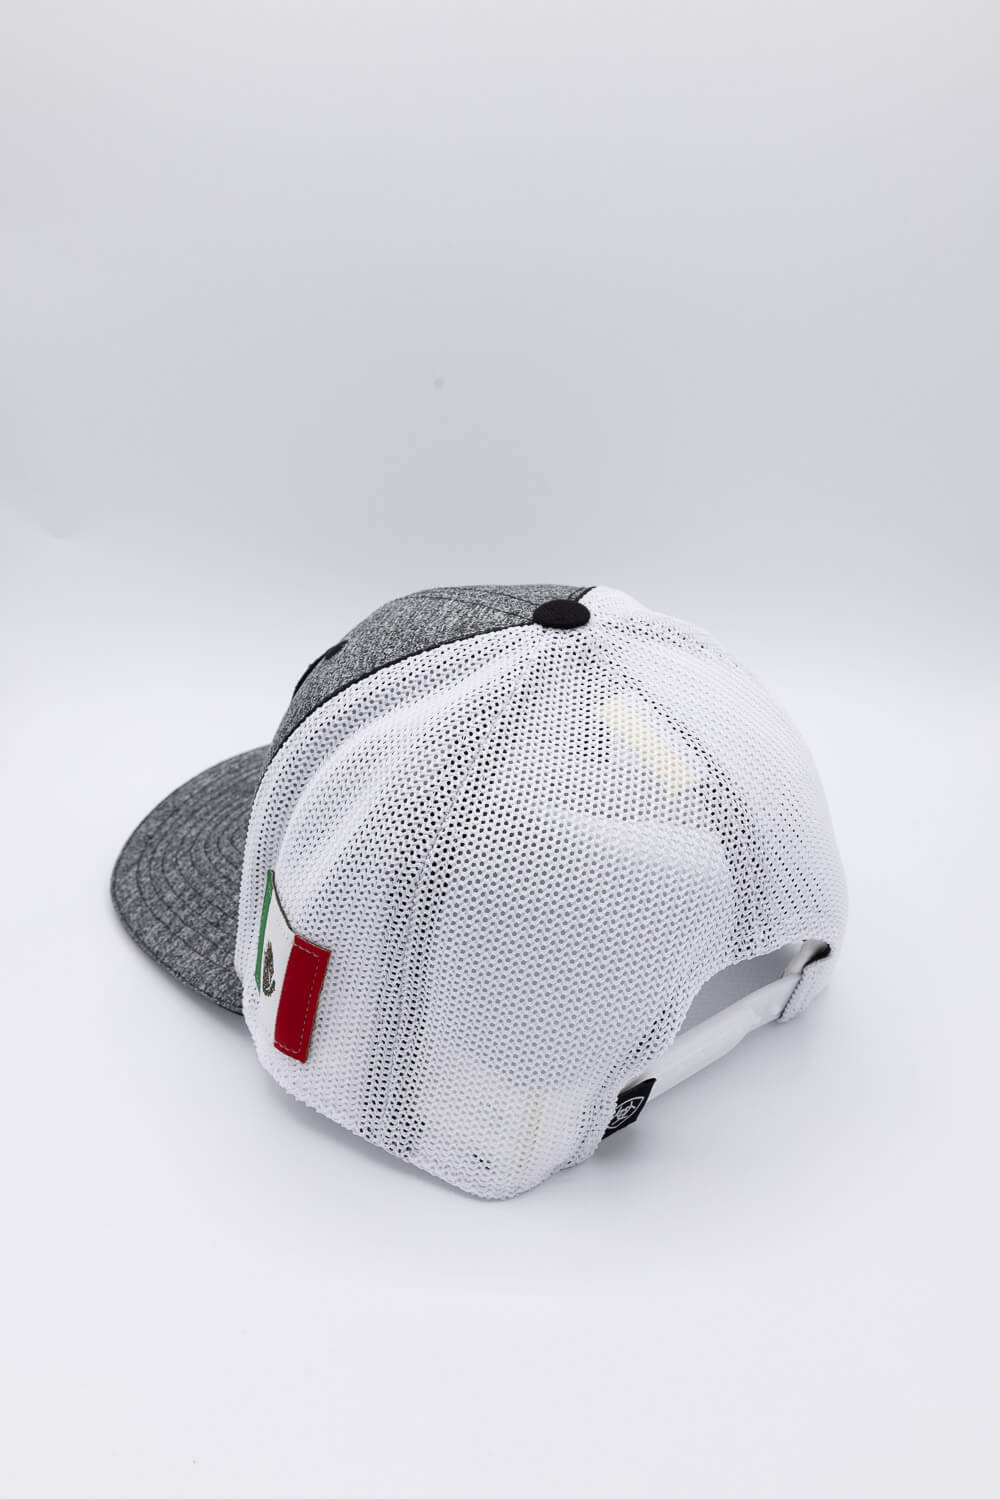 Ariat Heather Grey with Black Embroidered Logo with White Mesh Snap Back Cap, One Size